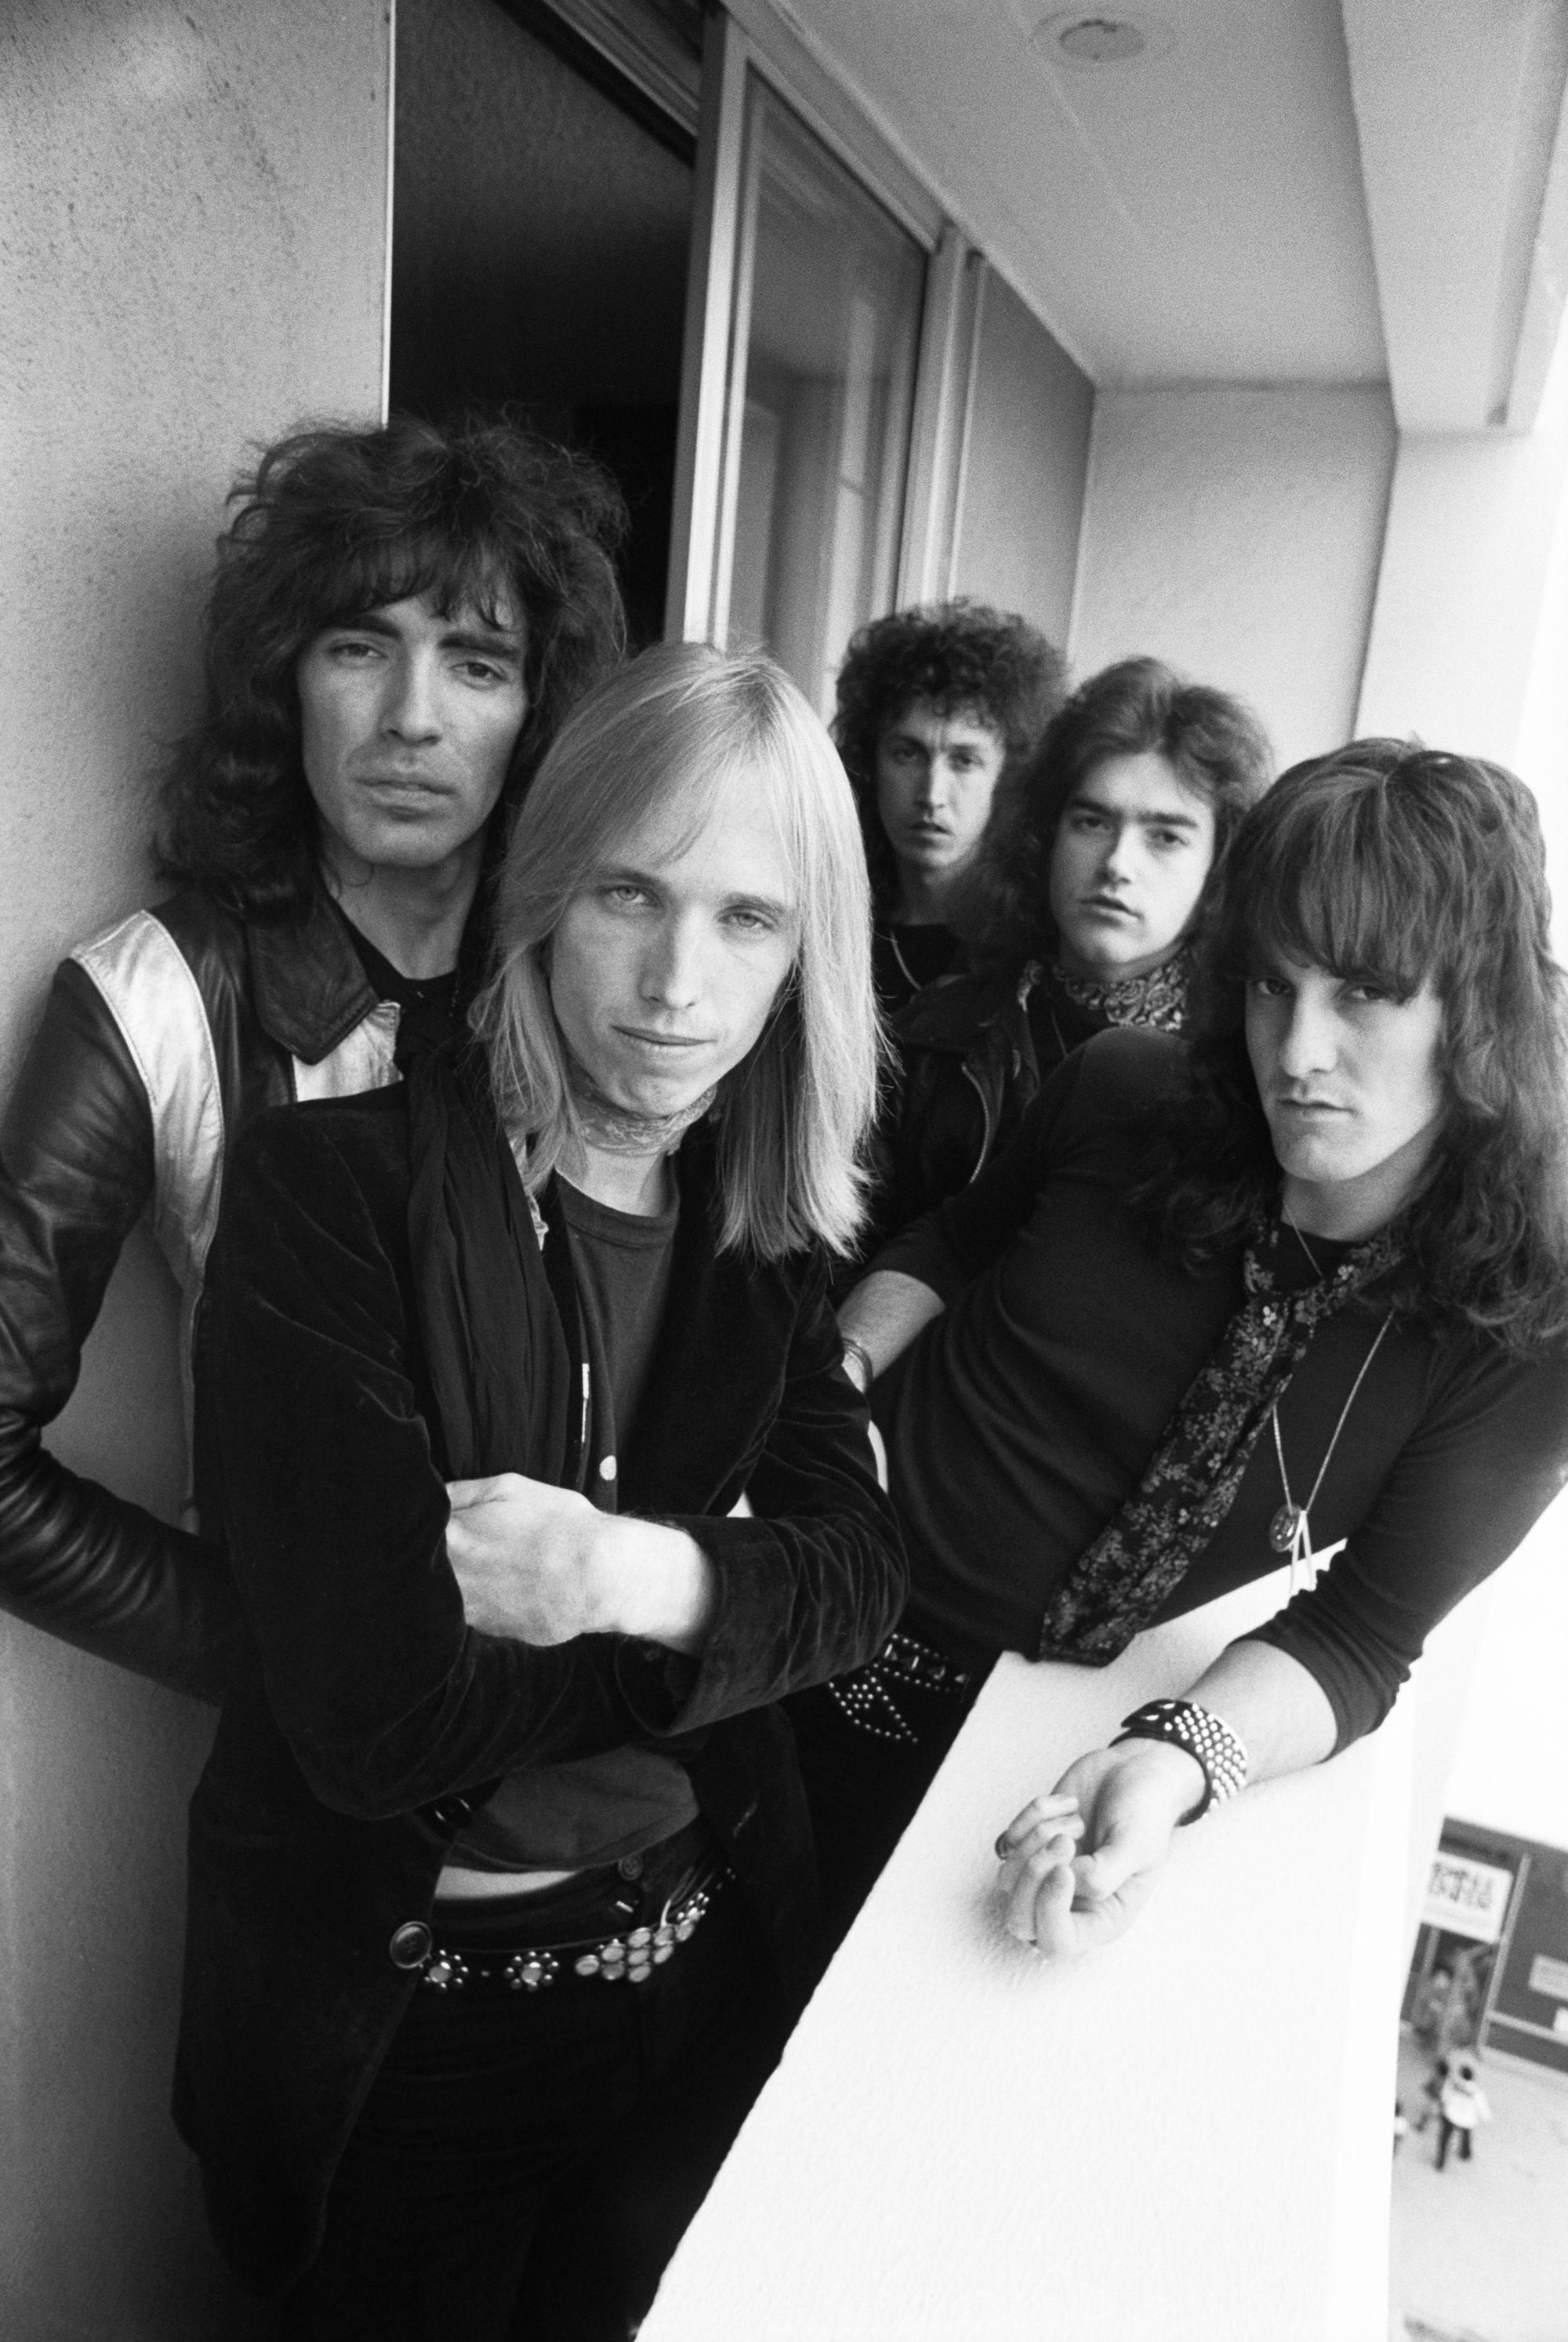 Tom Petty and the Heartbreakers in San Francisco, 1979.